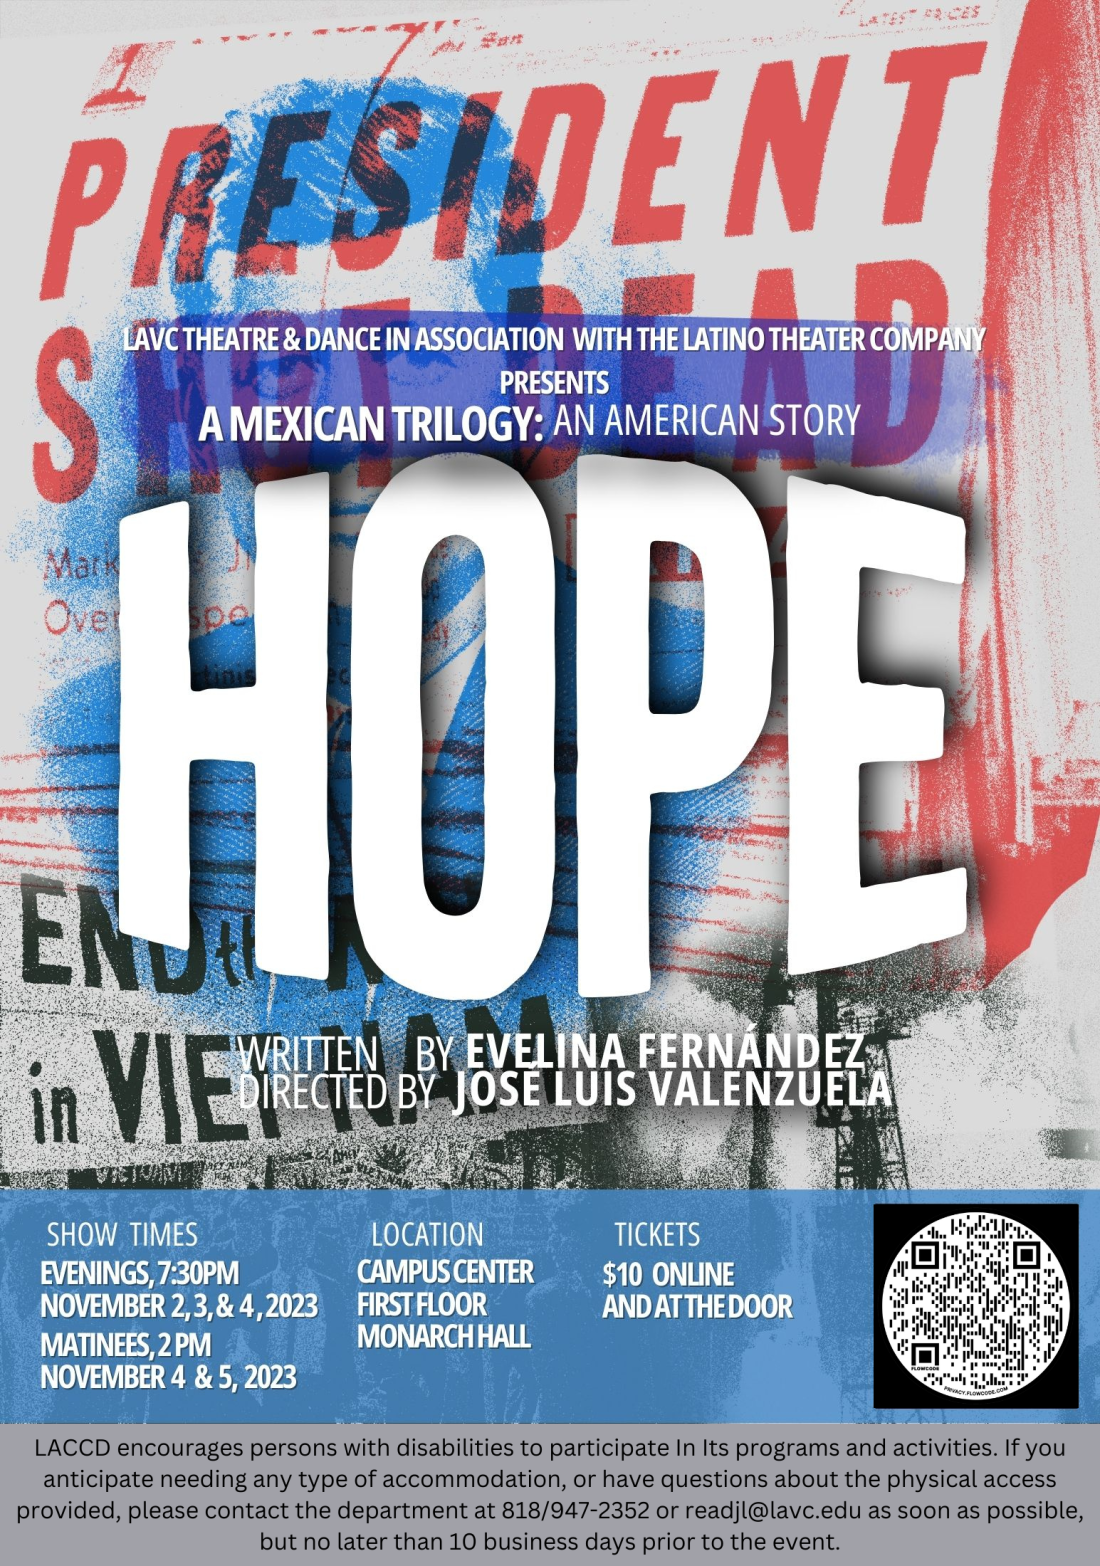 Hope by Evelina Fernandez. Scan QR code to purchase tickets.